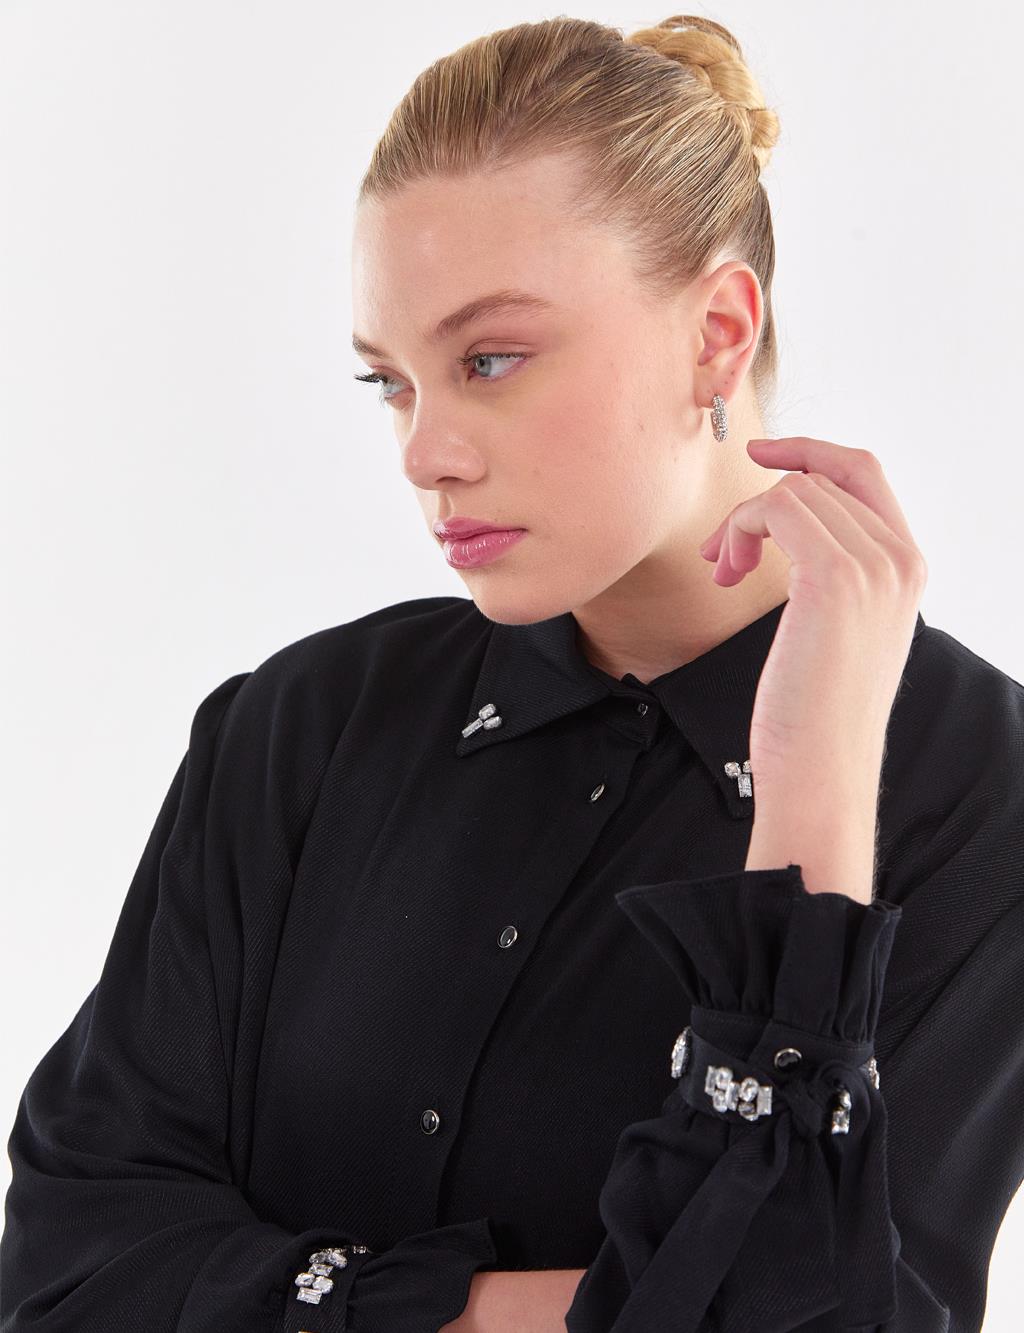 Stone Embroidered Shirt Black